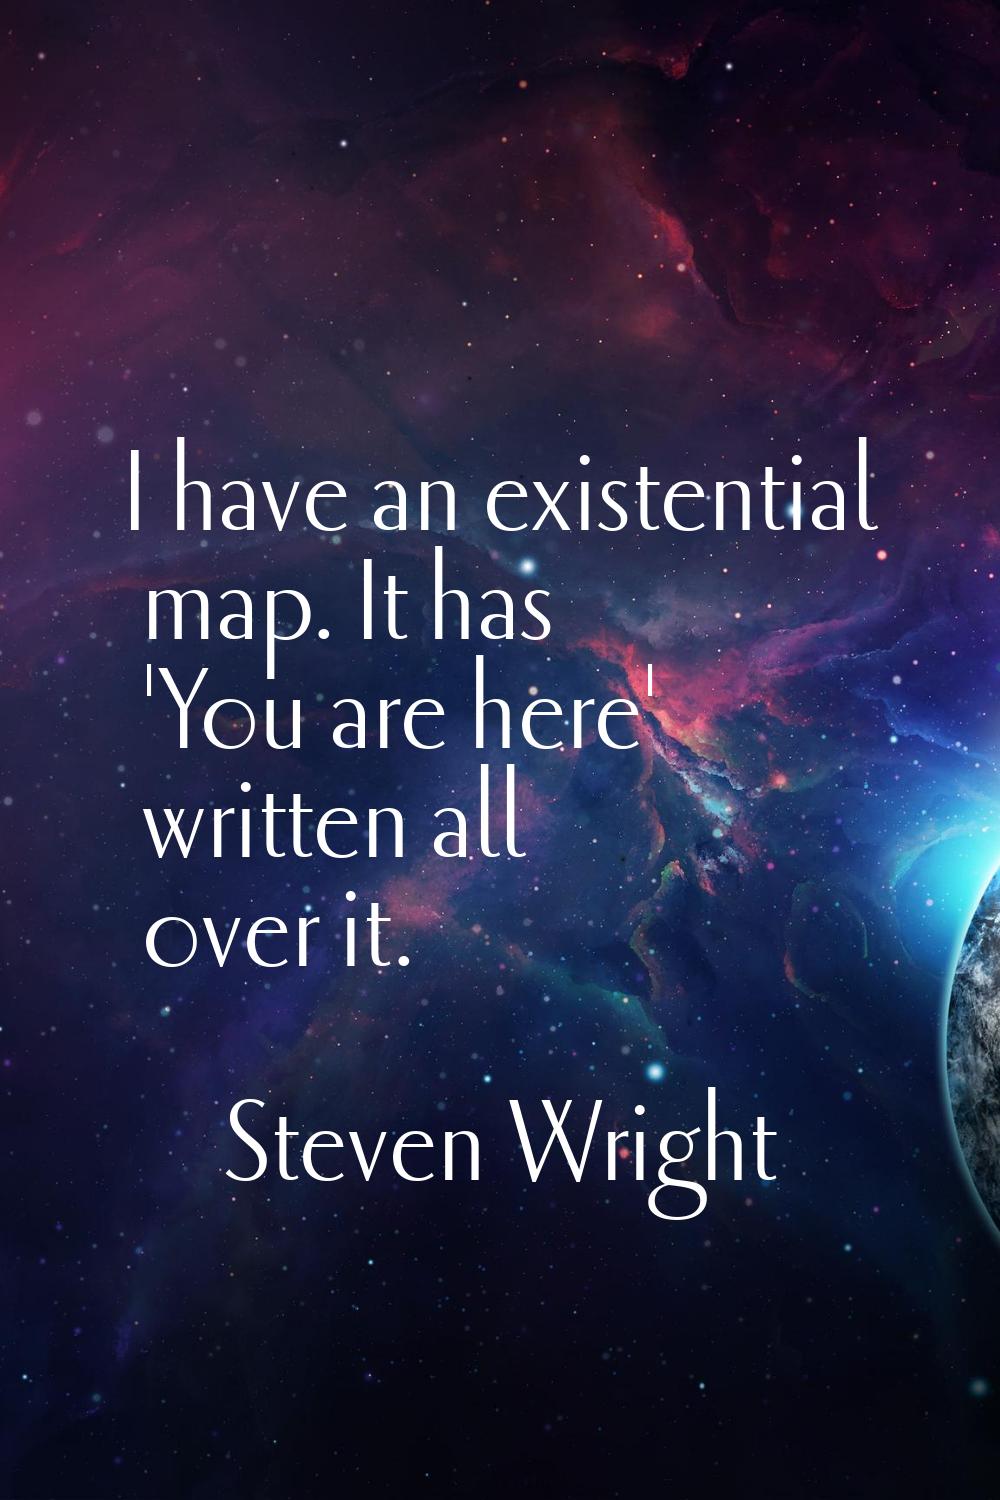 I have an existential map. It has 'You are here' written all over it.